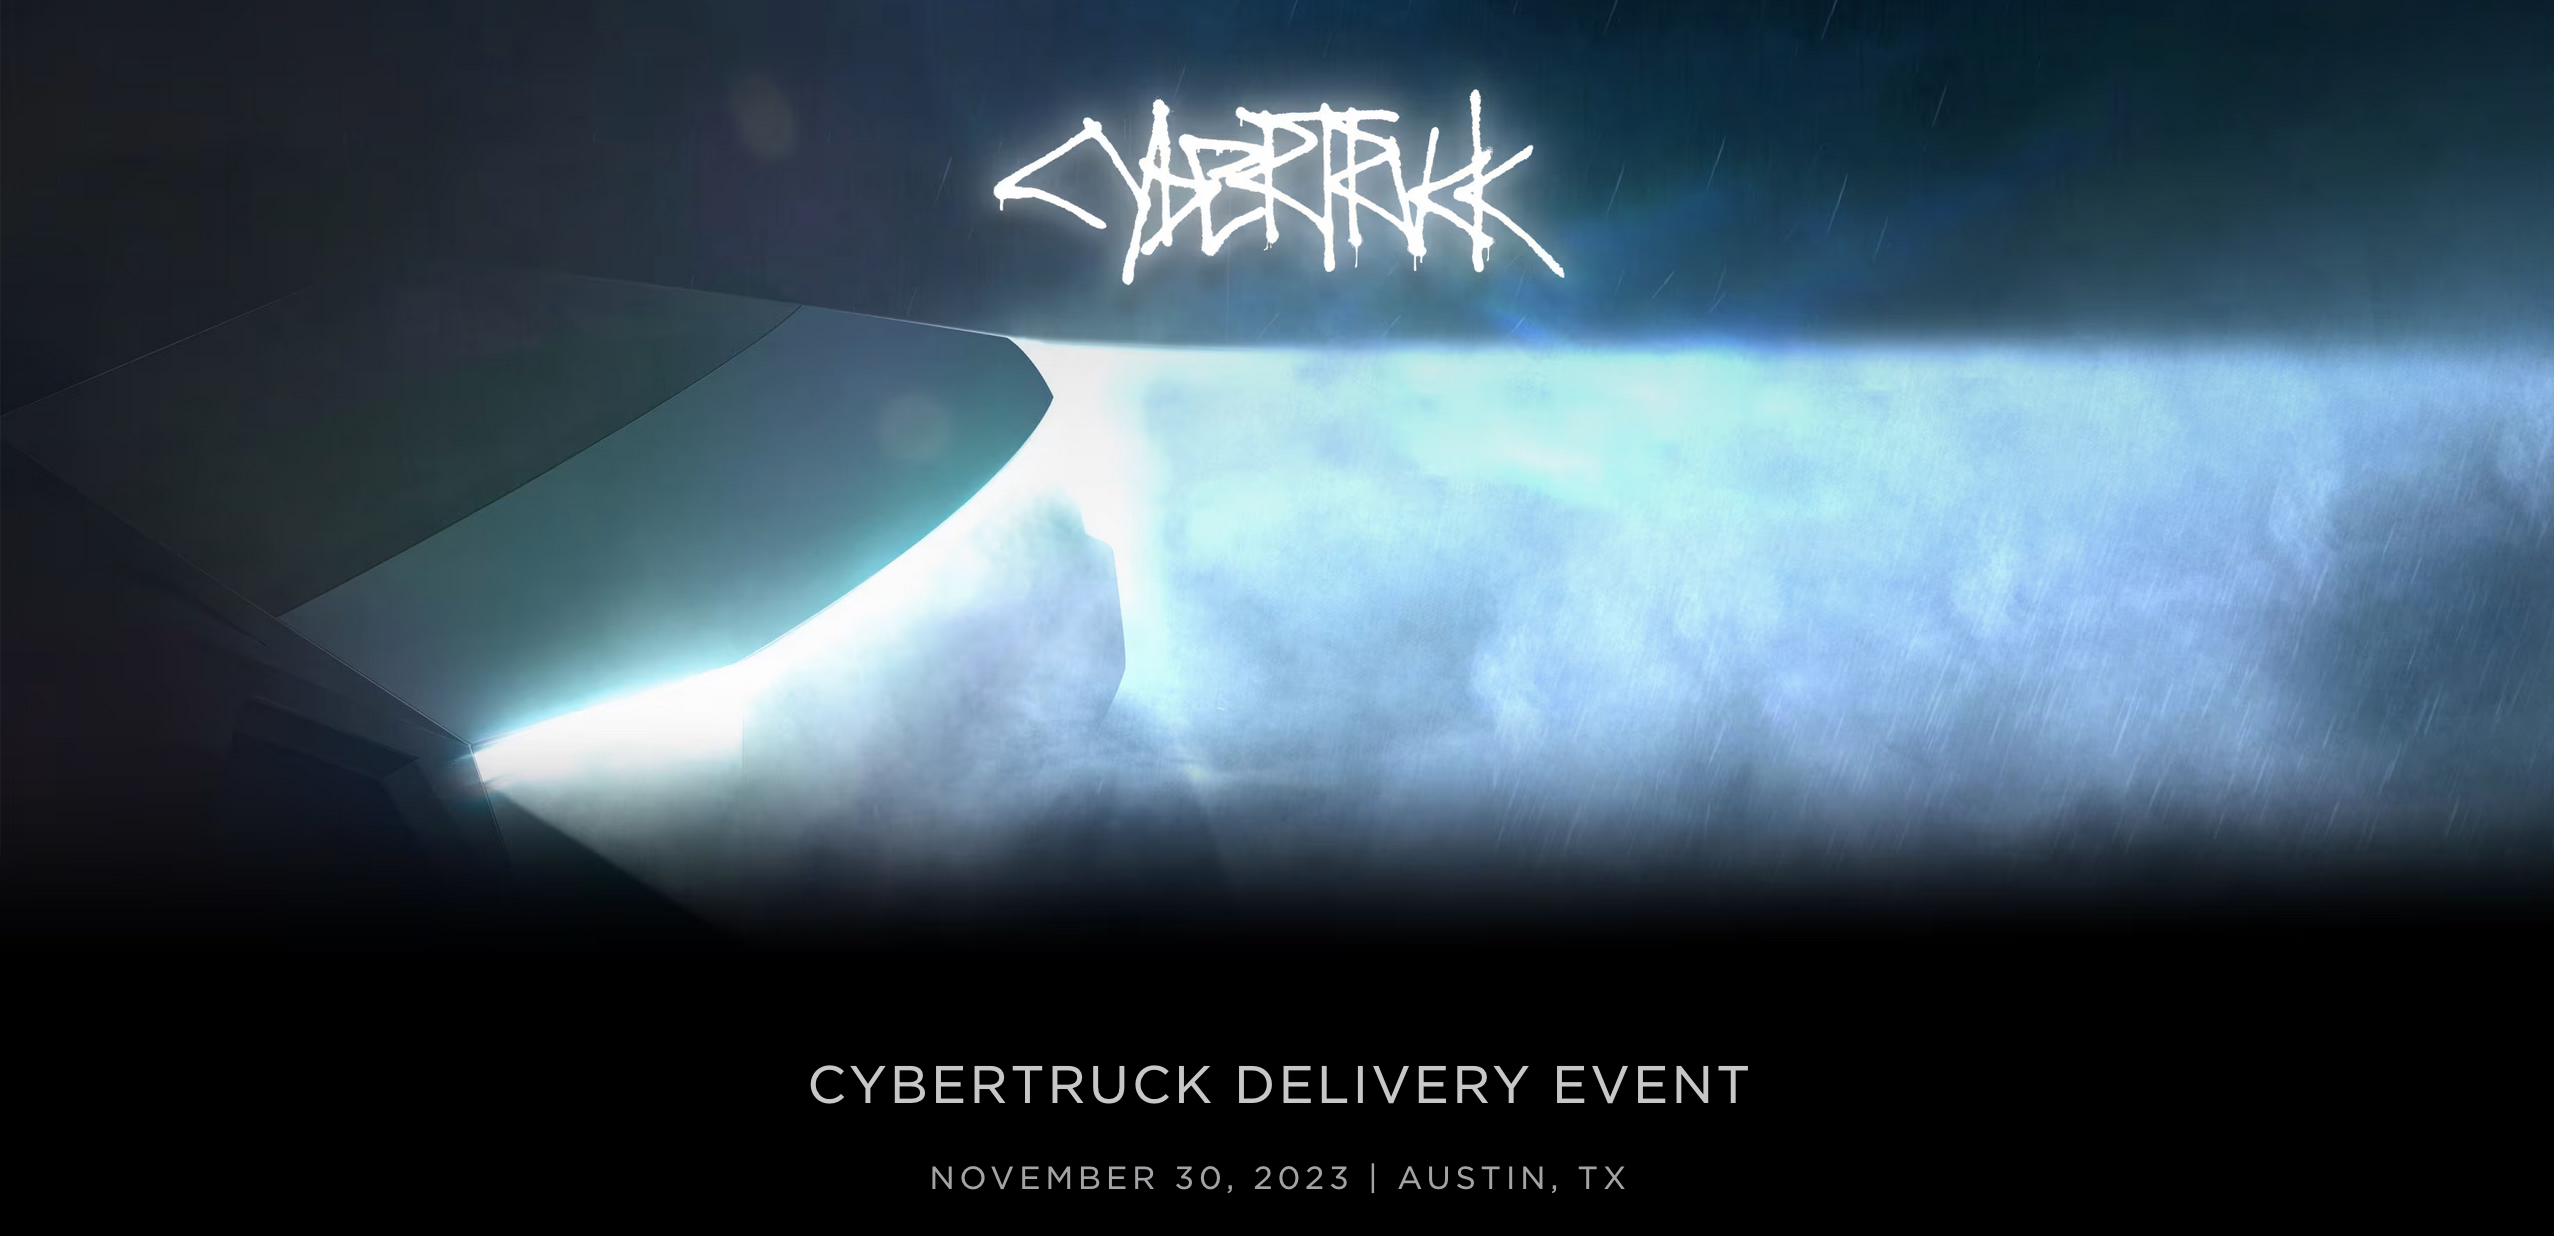 Tesla shareholders can win tickets to Cybertruck delivery event in Texas